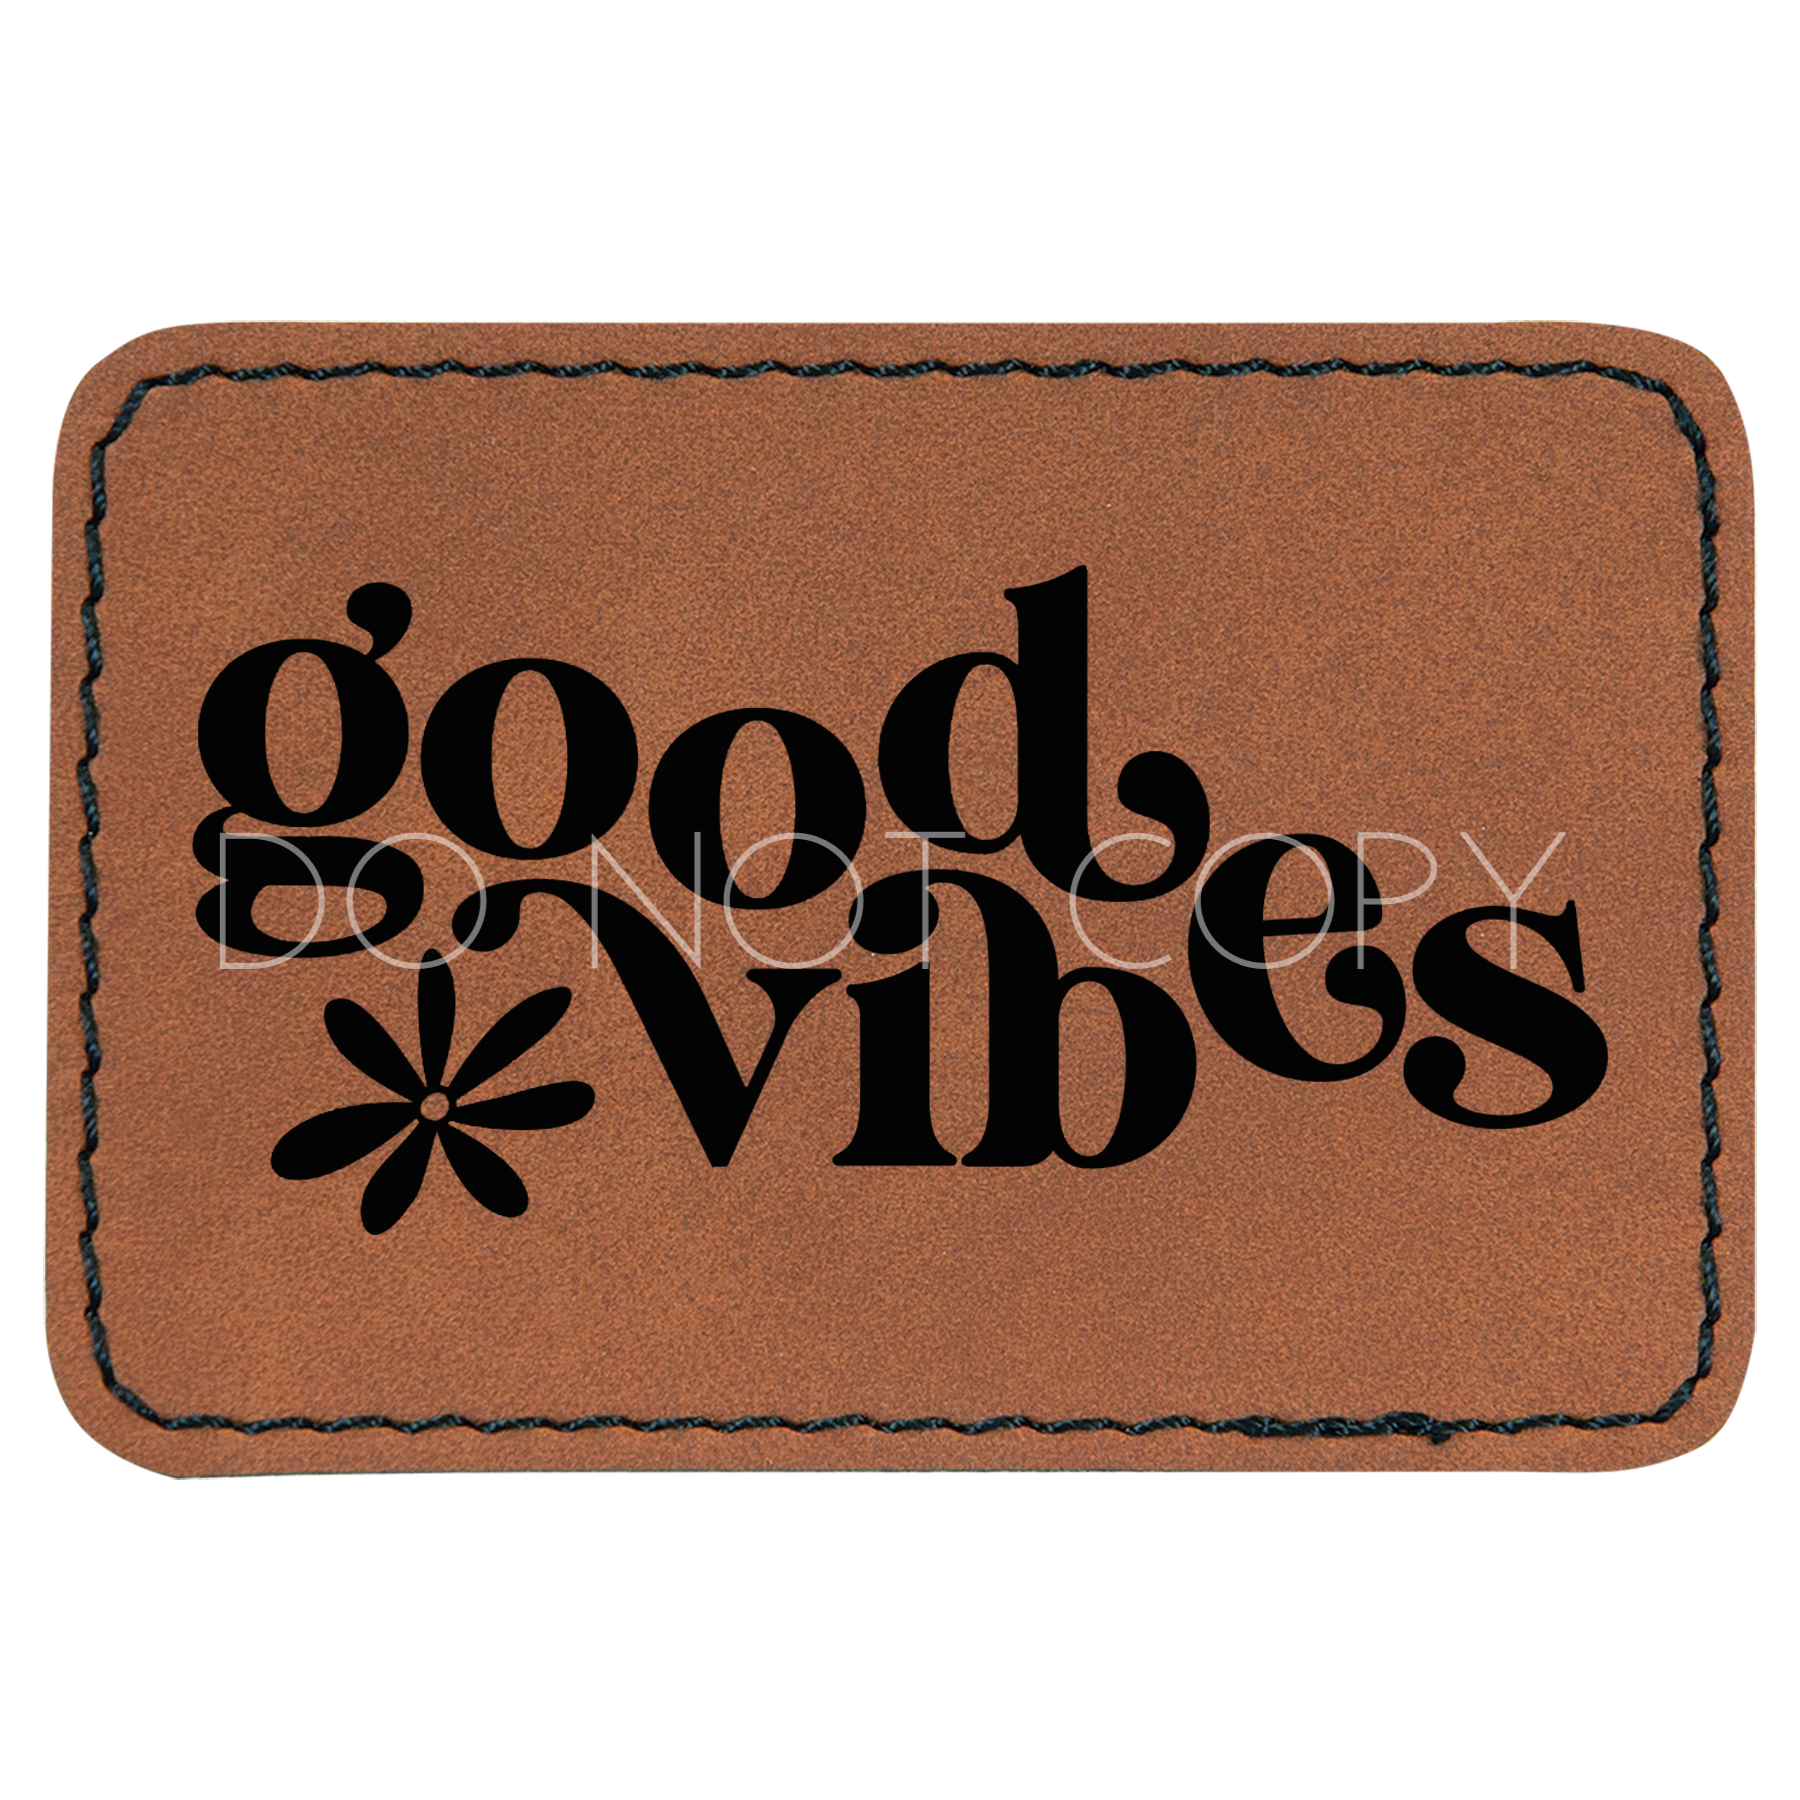 Good Vibes Spring Patch